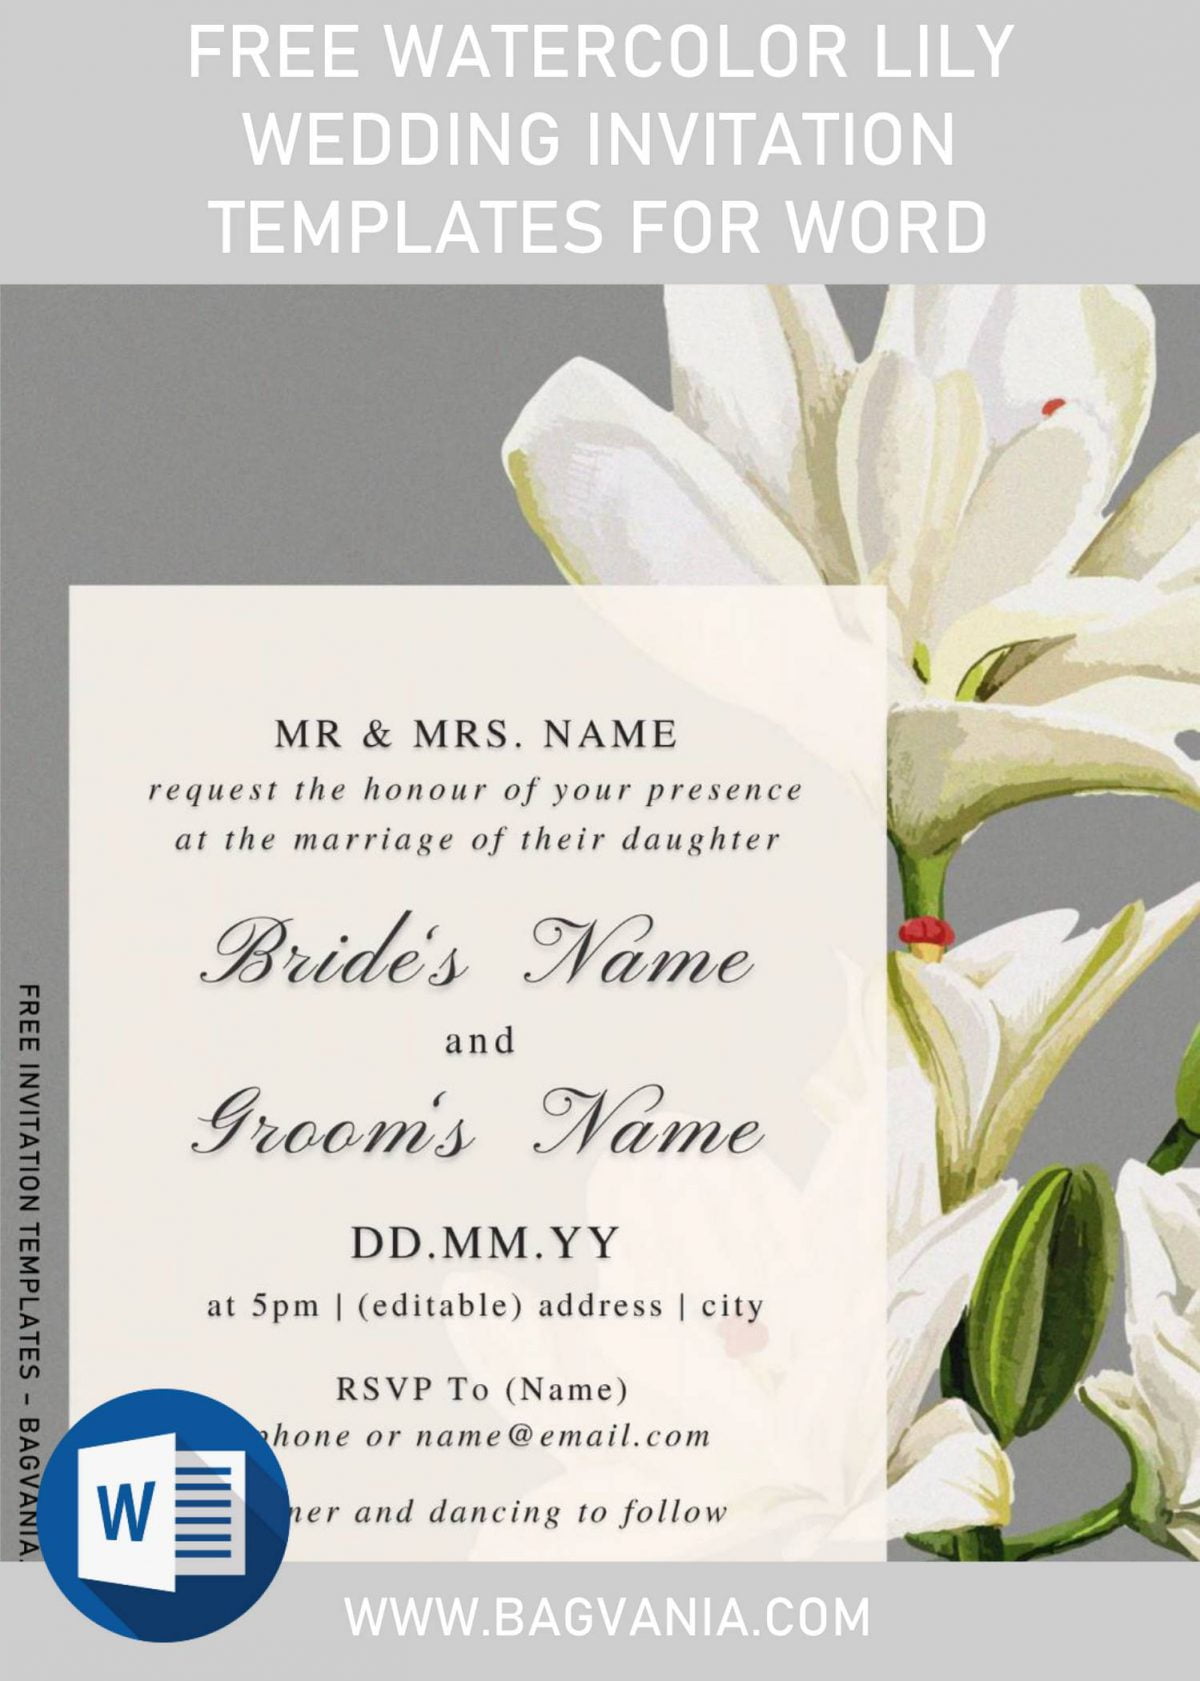 Free Watercolor Lily Wedding Invitation Templates For Word